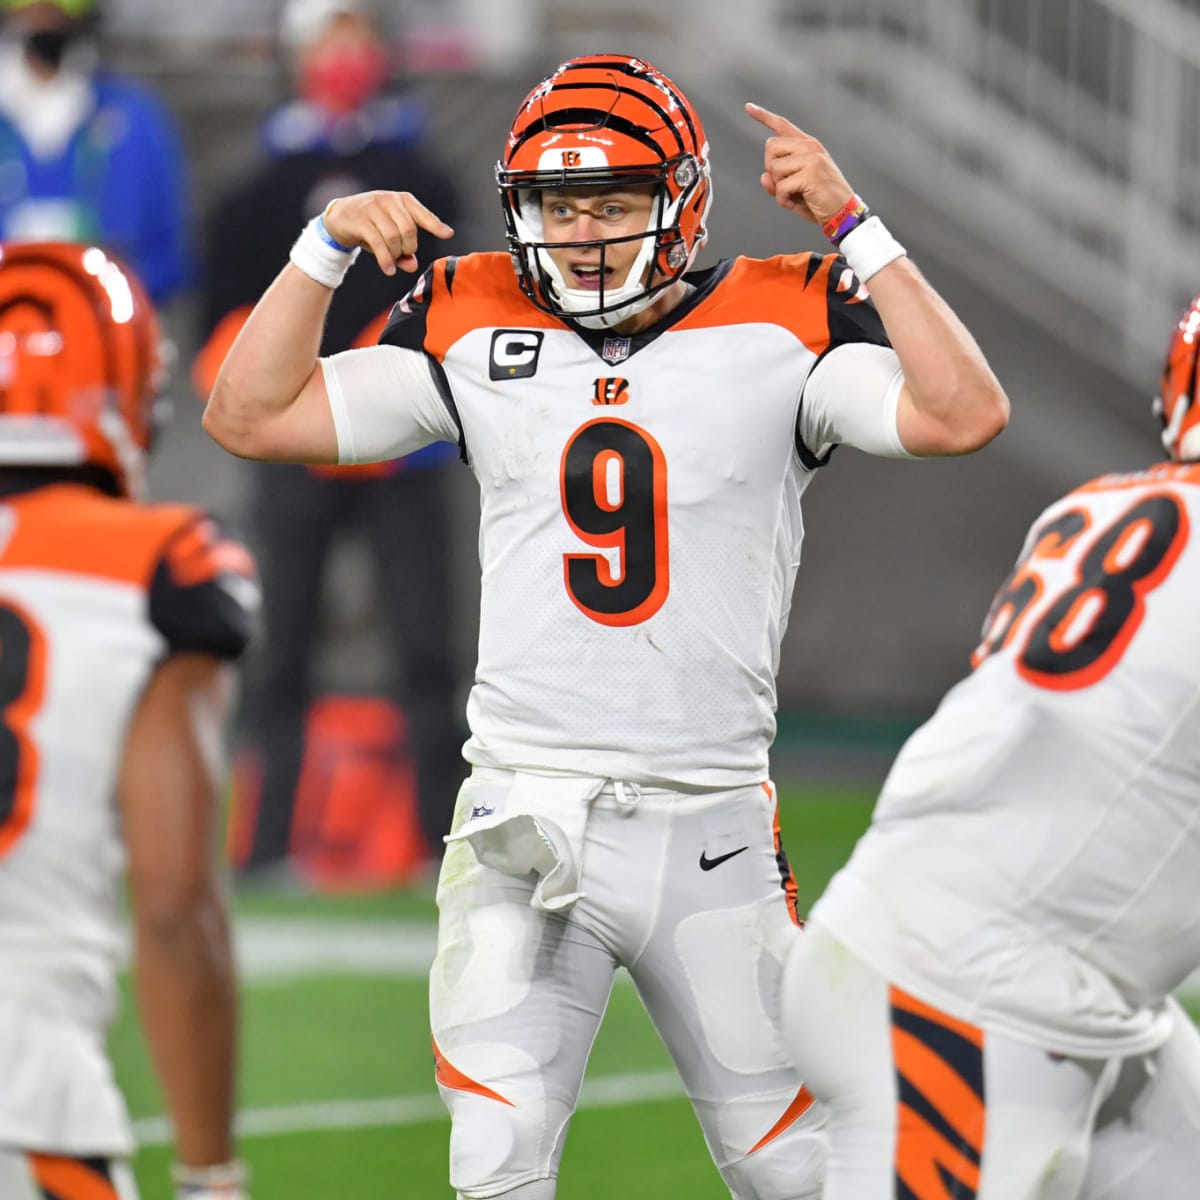 NFL Insider: Joe Burrow 'Stumping' For Bengals To Take 1 Player At